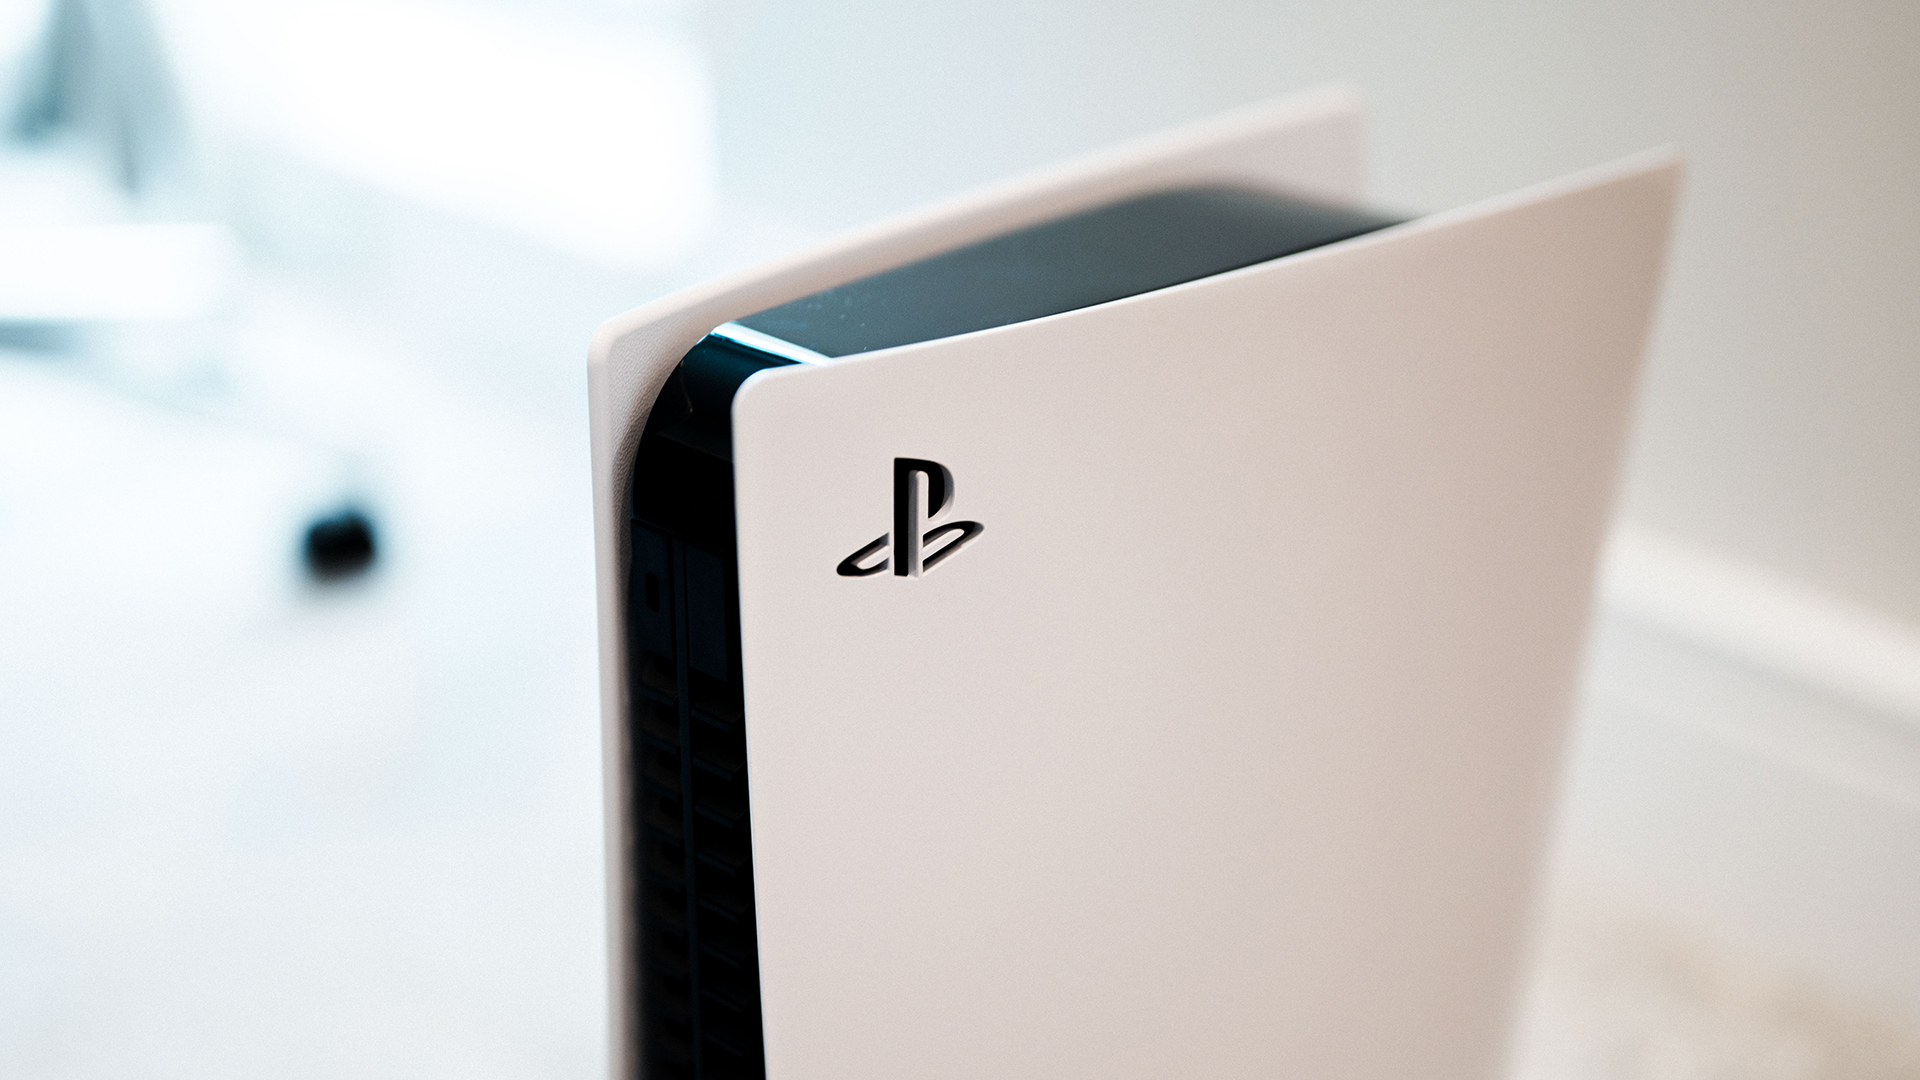 The slim PS5 is still huge - The Verge